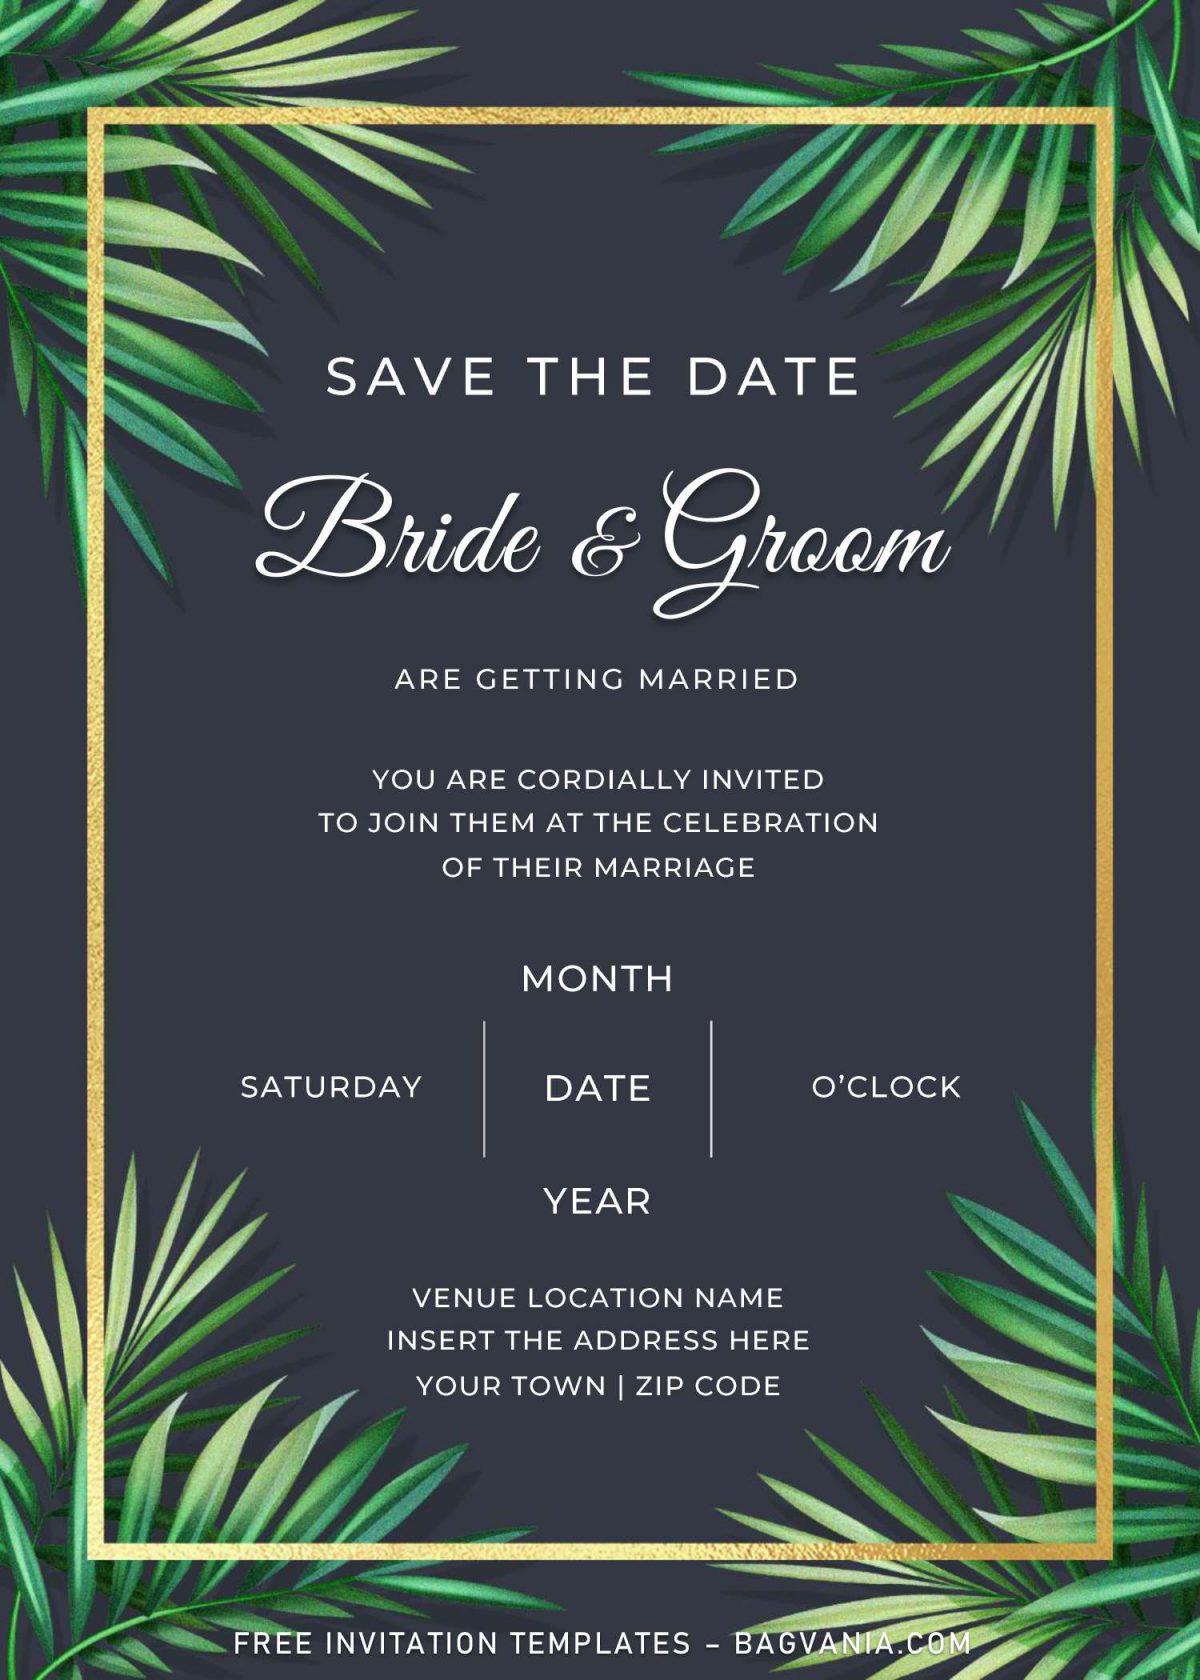 Free Greenery Wedding Invitation Templates For Word and has palm leaves